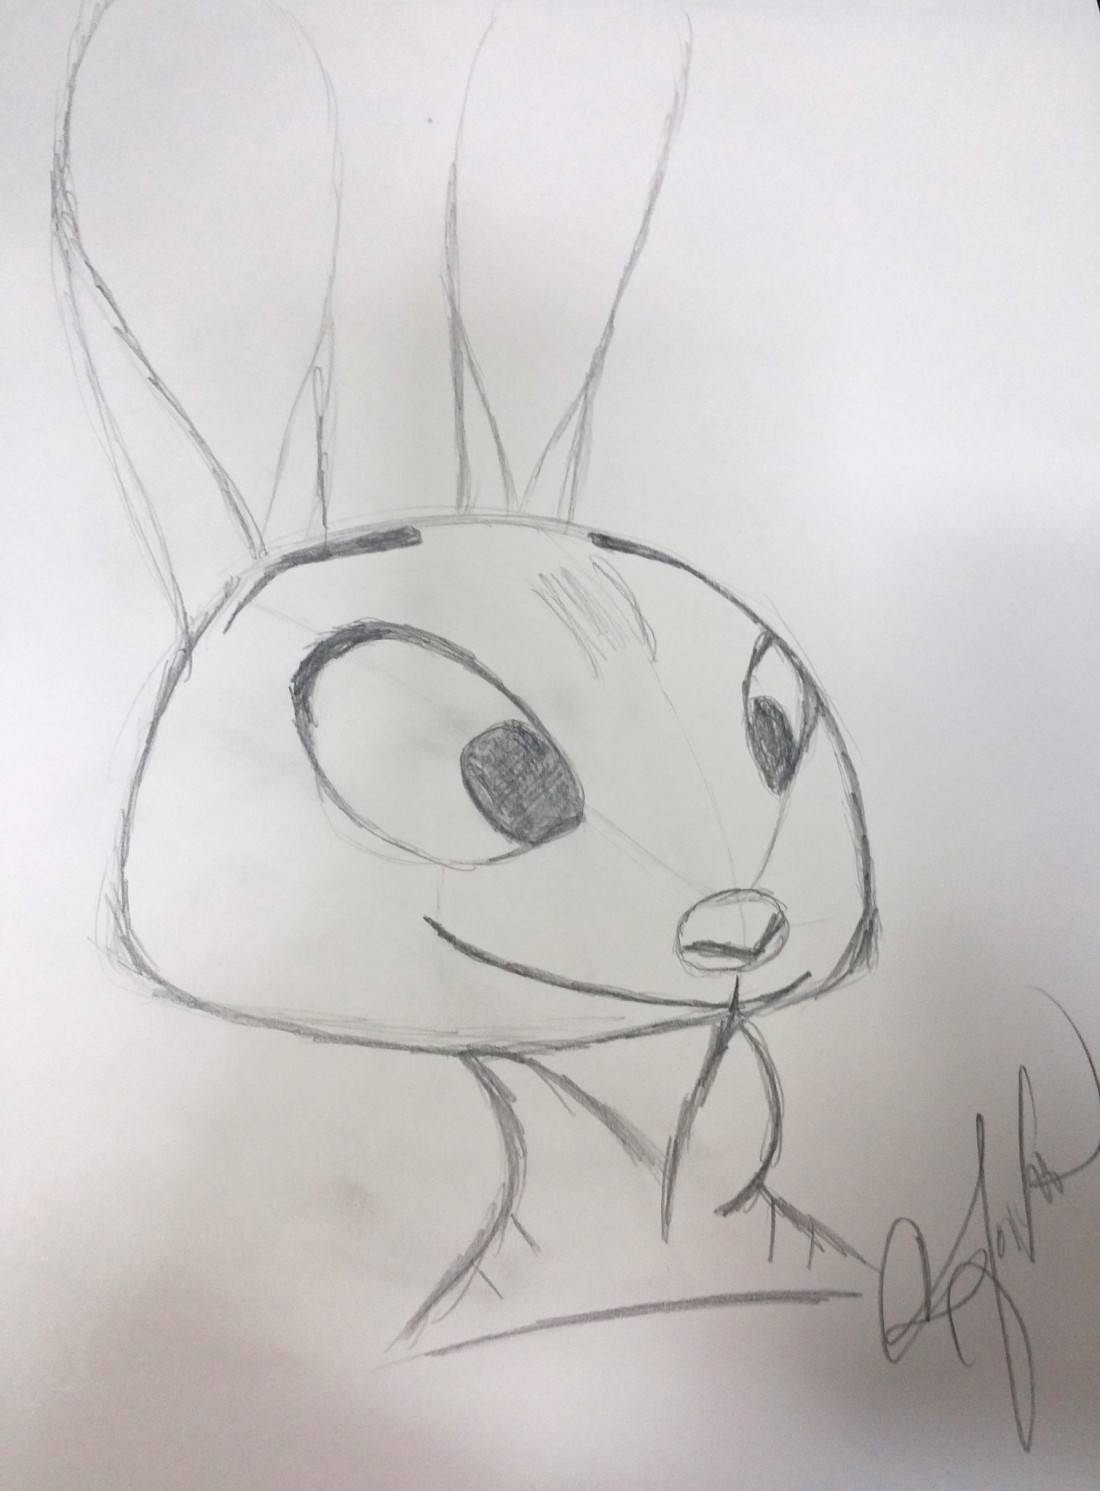 Behind The Scenes Of Zootopia – Creating Judy Hopps, Nick Wilde, And Other Characters